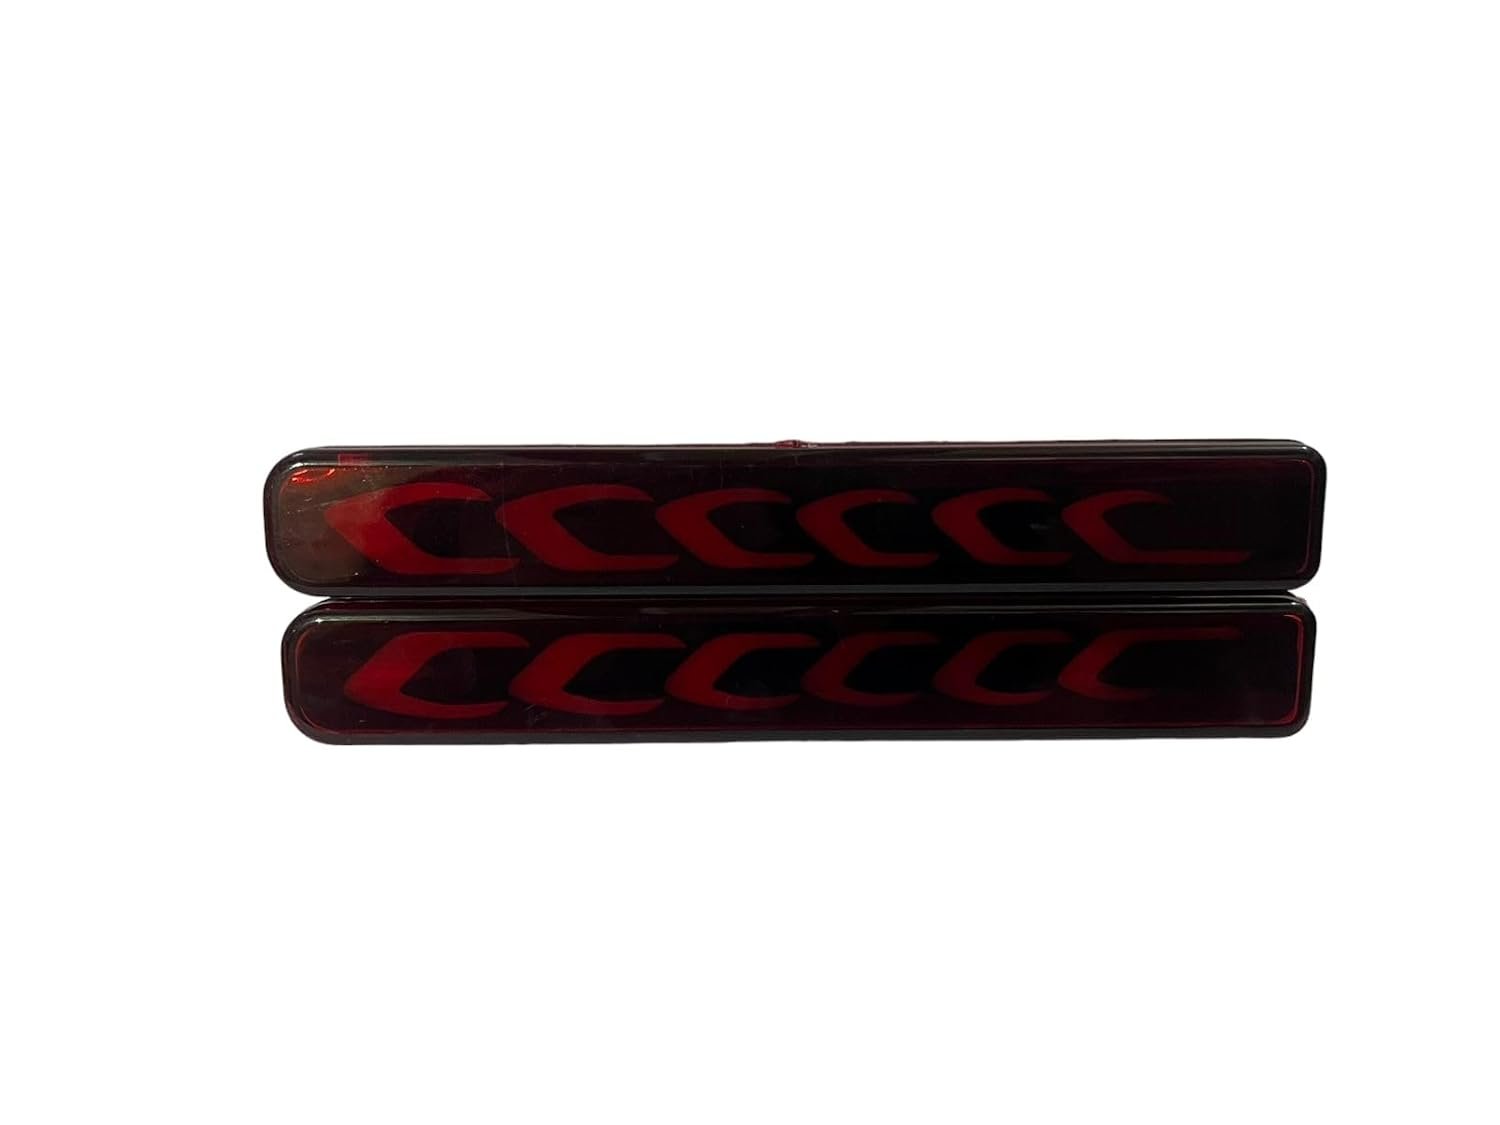 Car Rear Bumper Reflector Led Brake Light Compatible with Brezza 2022, XL6, Fronx (Type-D) Image 